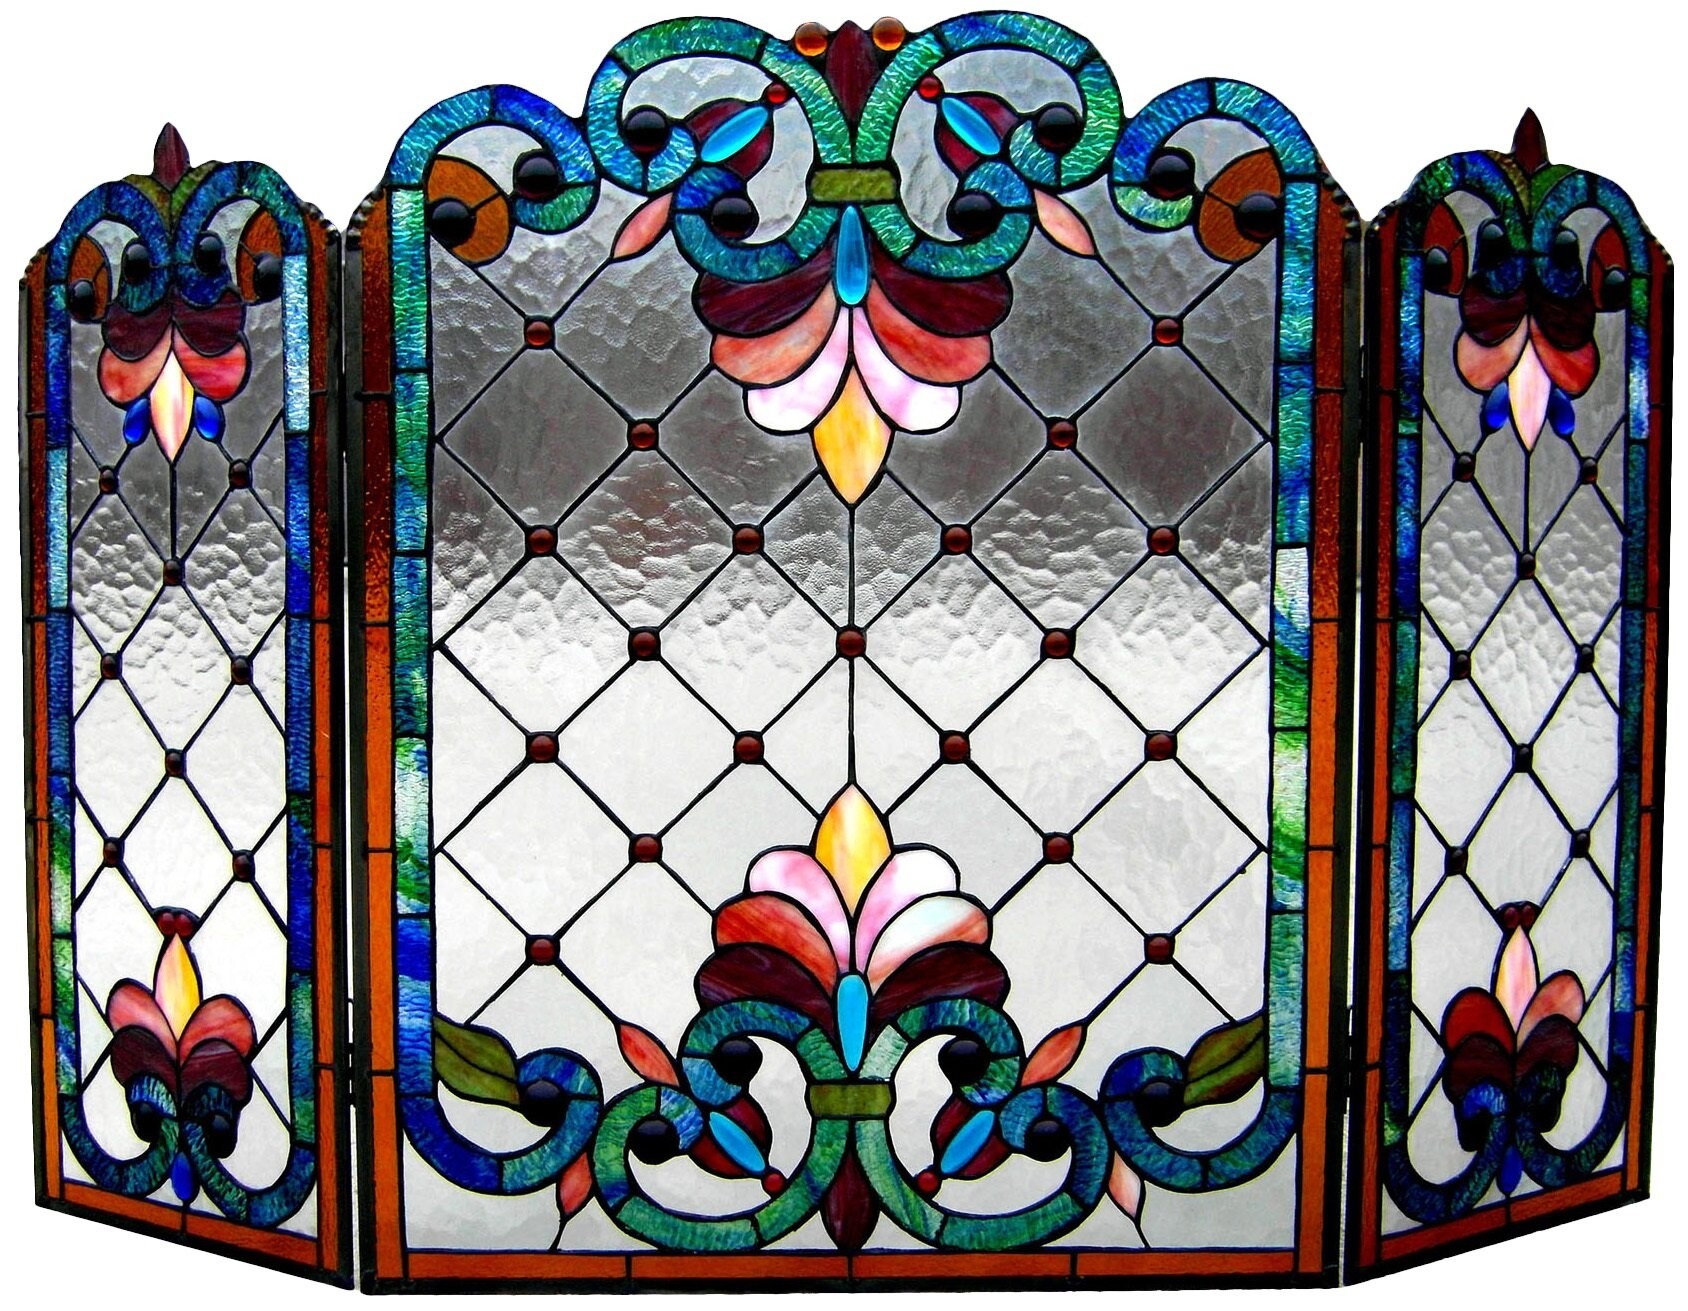 Imitation stained glass panels